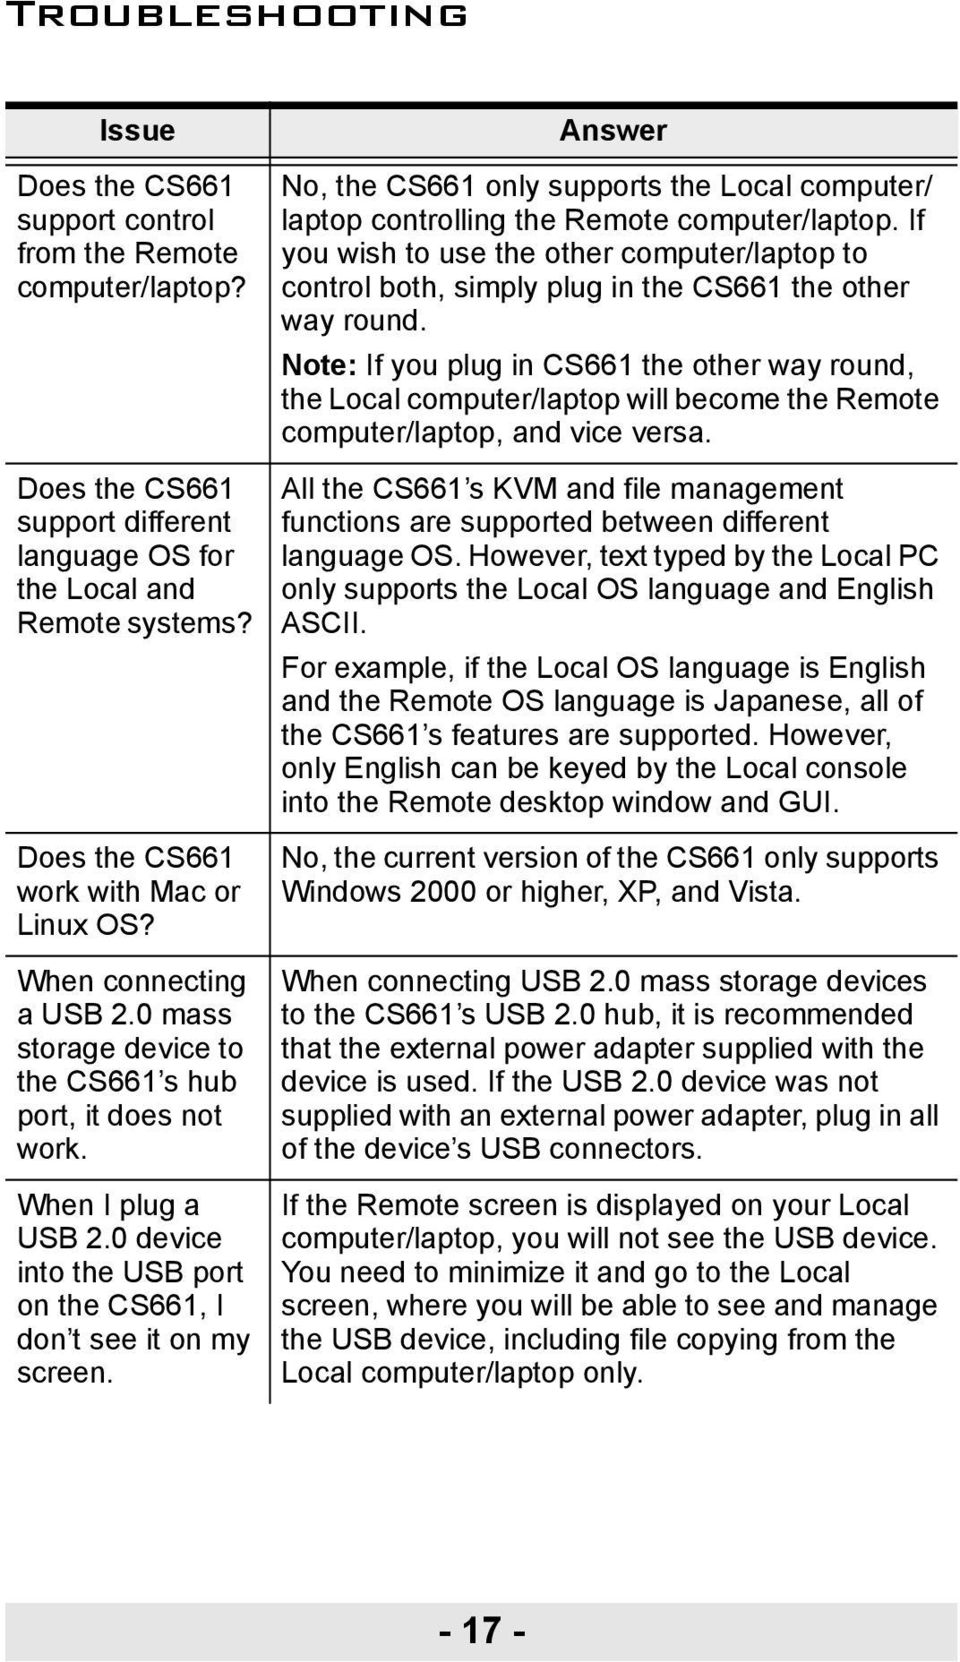 Note: If you plug in CS661 the other way round, the Local computer/laptop will become the Remote computer/laptop, and vice versa.